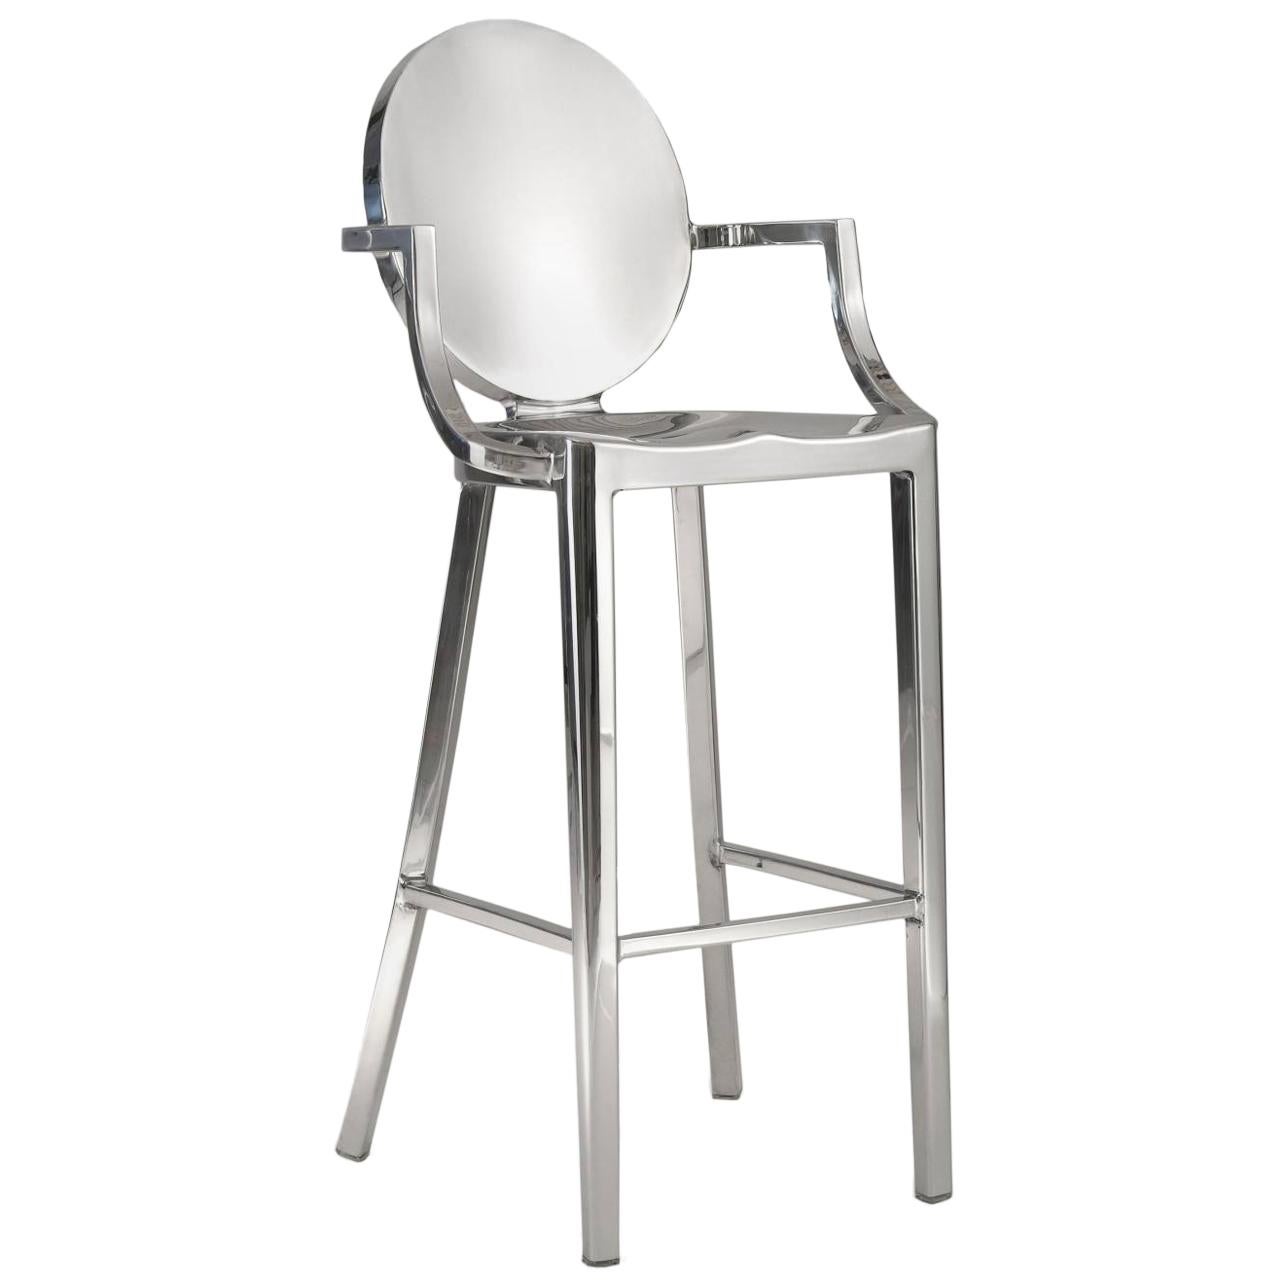 Emeco Kong Barstool w/ Arms in Polished Aluminum by Philippe Starck